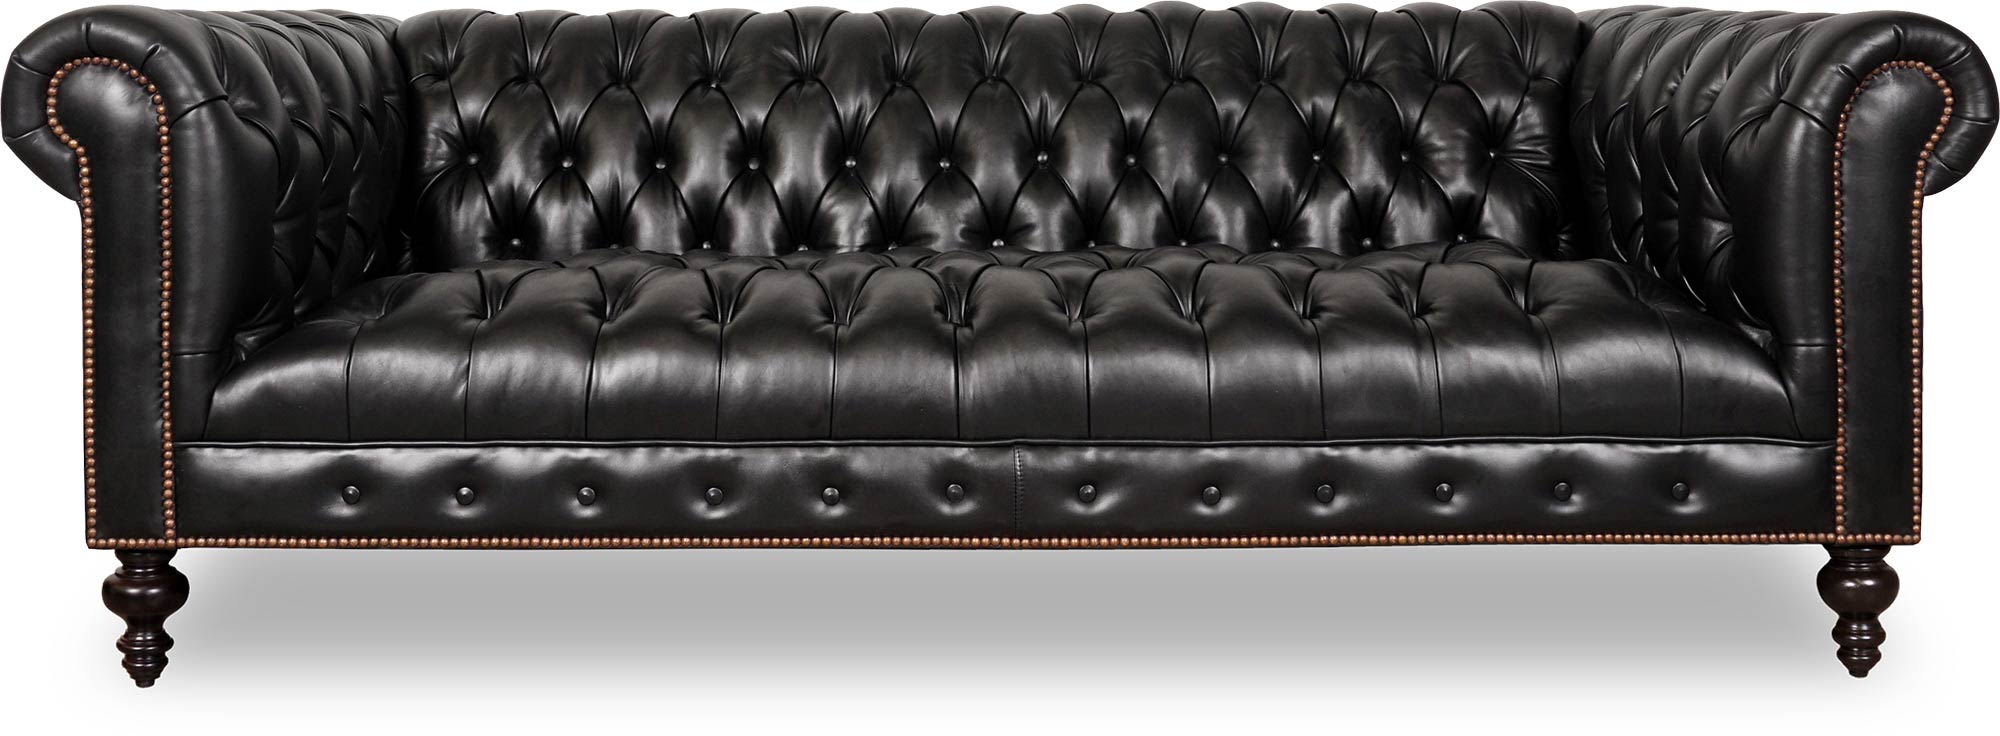 Chesterfield Sofas Armchairs, Black Leather Tufted Sofa